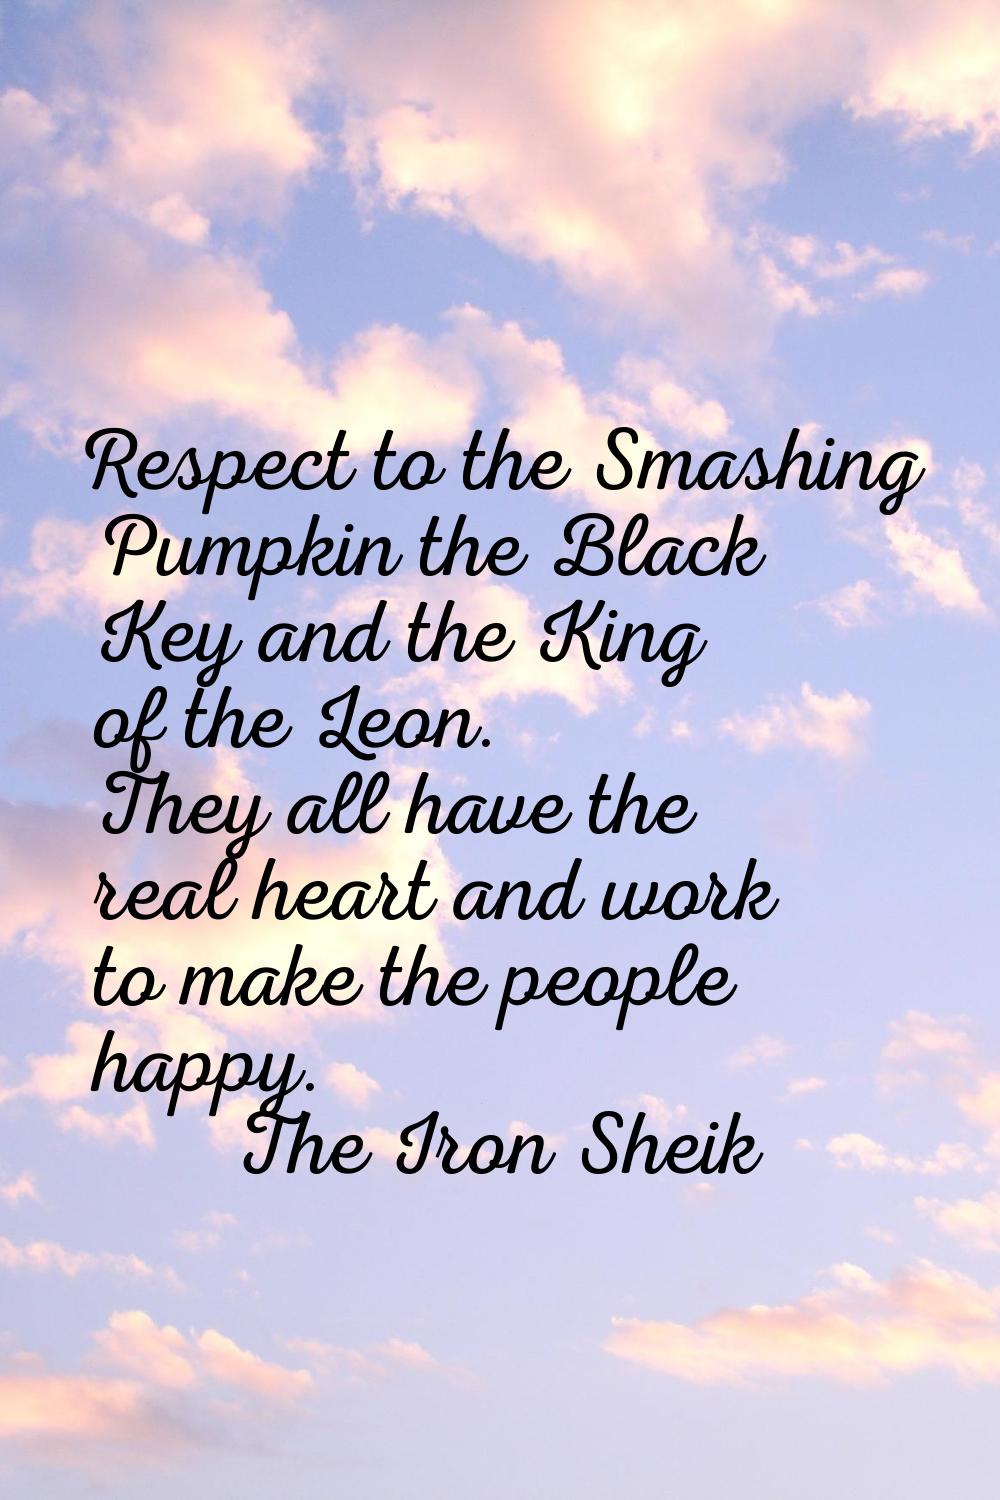 Respect to the Smashing Pumpkin the Black Key and the King of the Leon. They all have the real hear